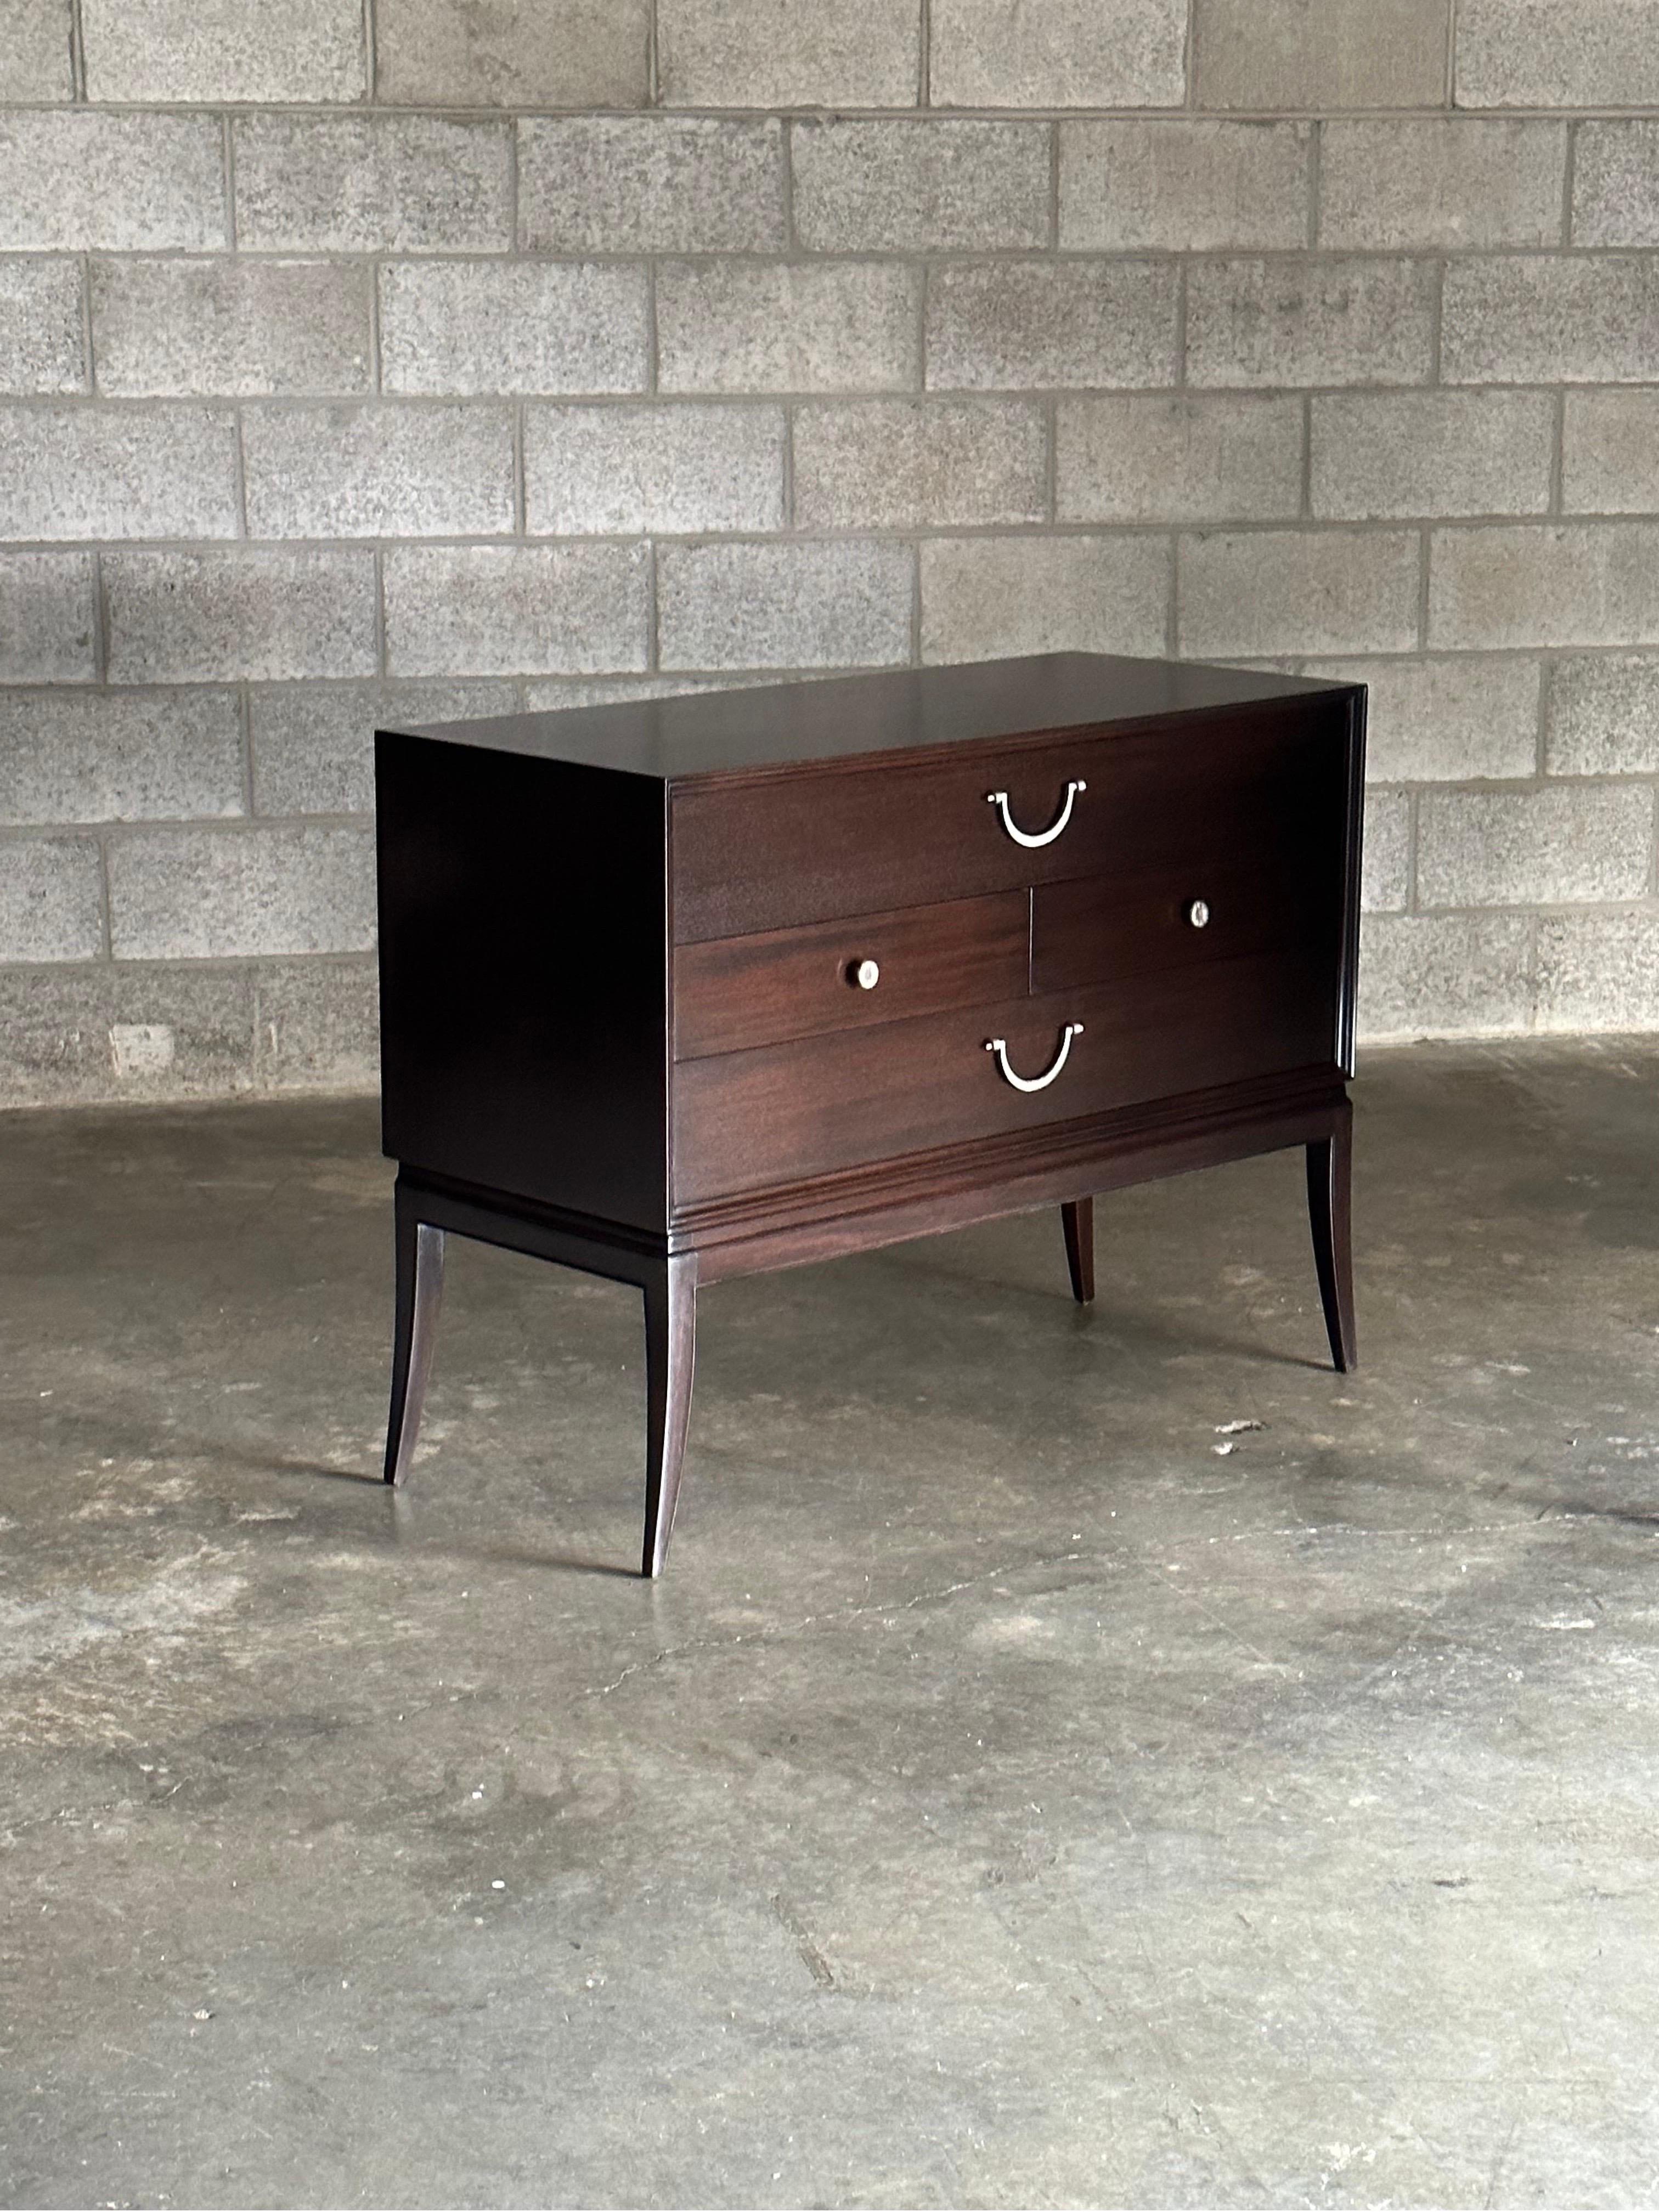 Mid-20th Century Tommi Parzinger Chests for Charak Modern- A Pair For Sale